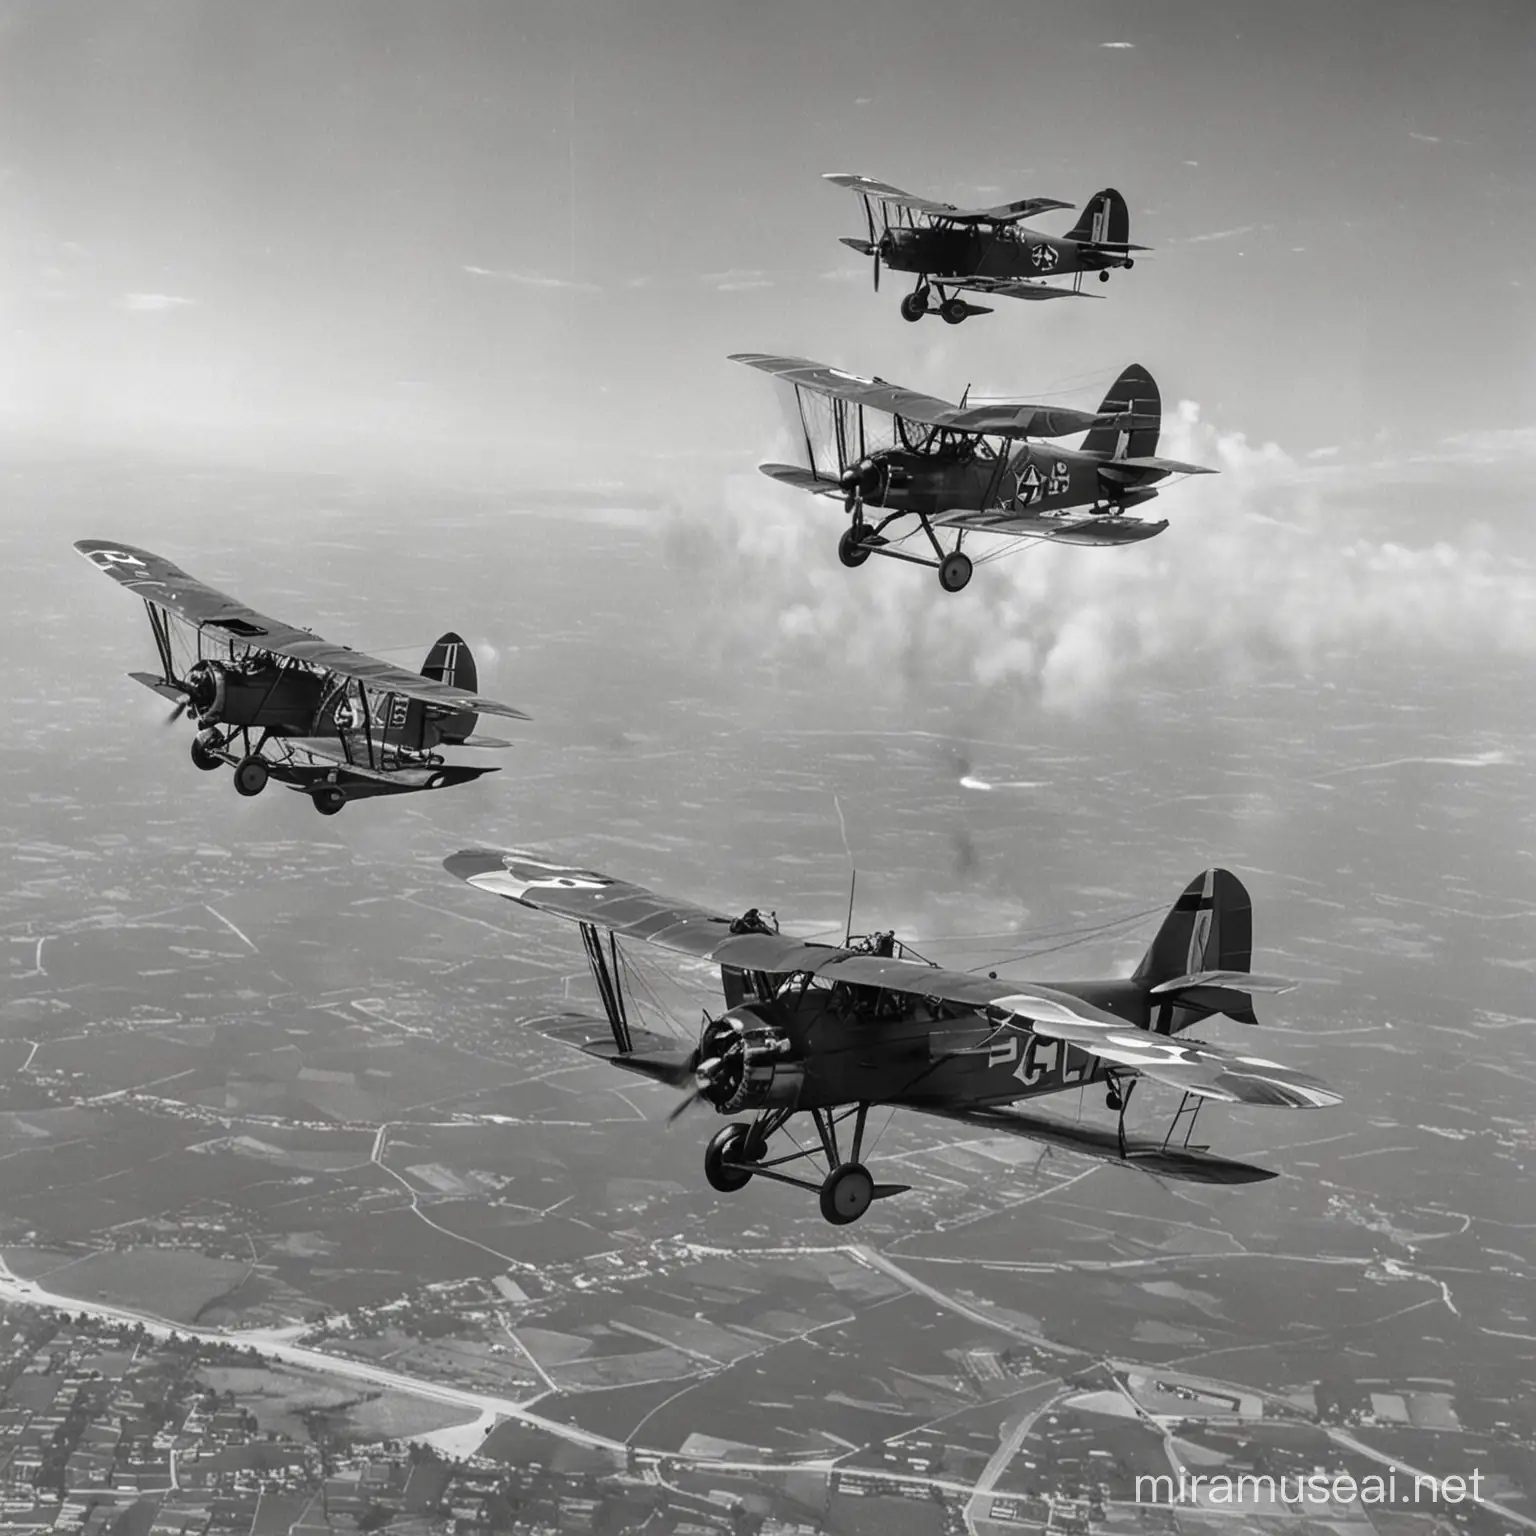 Wedge Formation of Vintage Aircraft with Machine Guns and Observation Planes